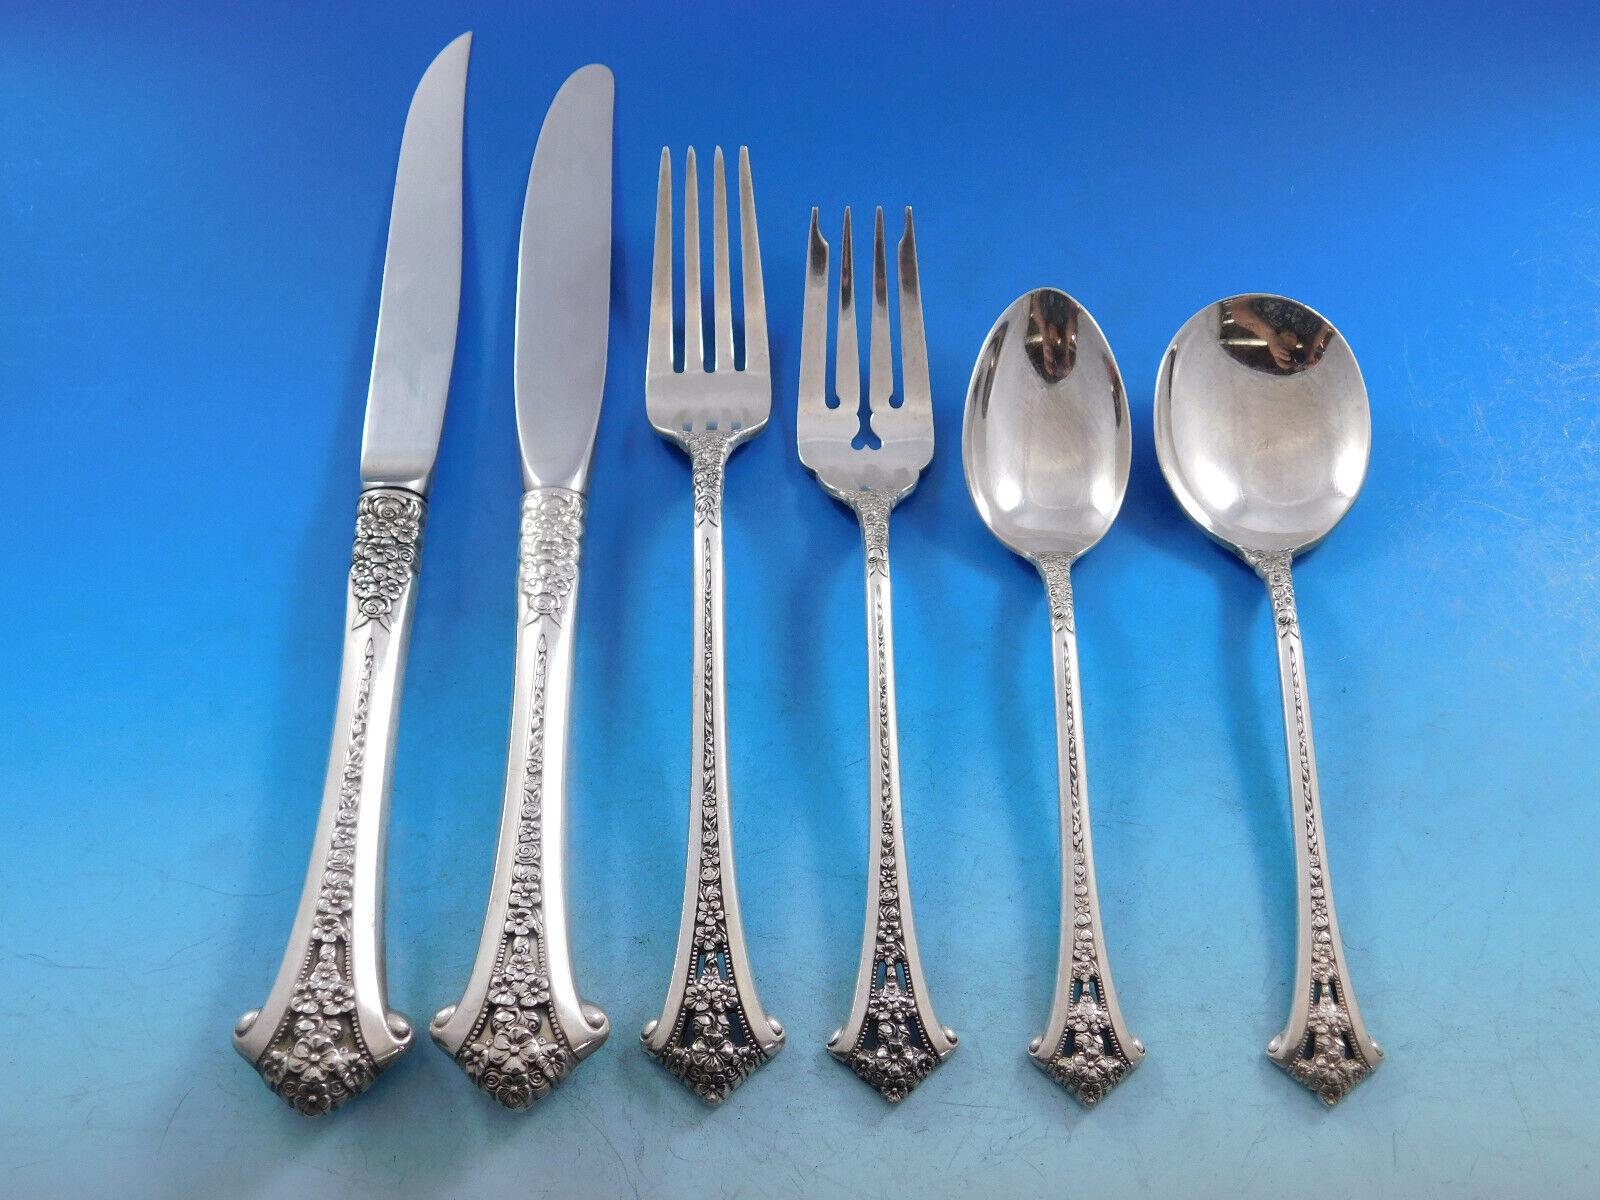 Classic Bouquet by Gorham sterling silver Flatware set, 56 pieces. The handle design is a bouquet of flowers with pierced and beaded detailing. This set includes:

8 Place Size Knives, 9 1/8